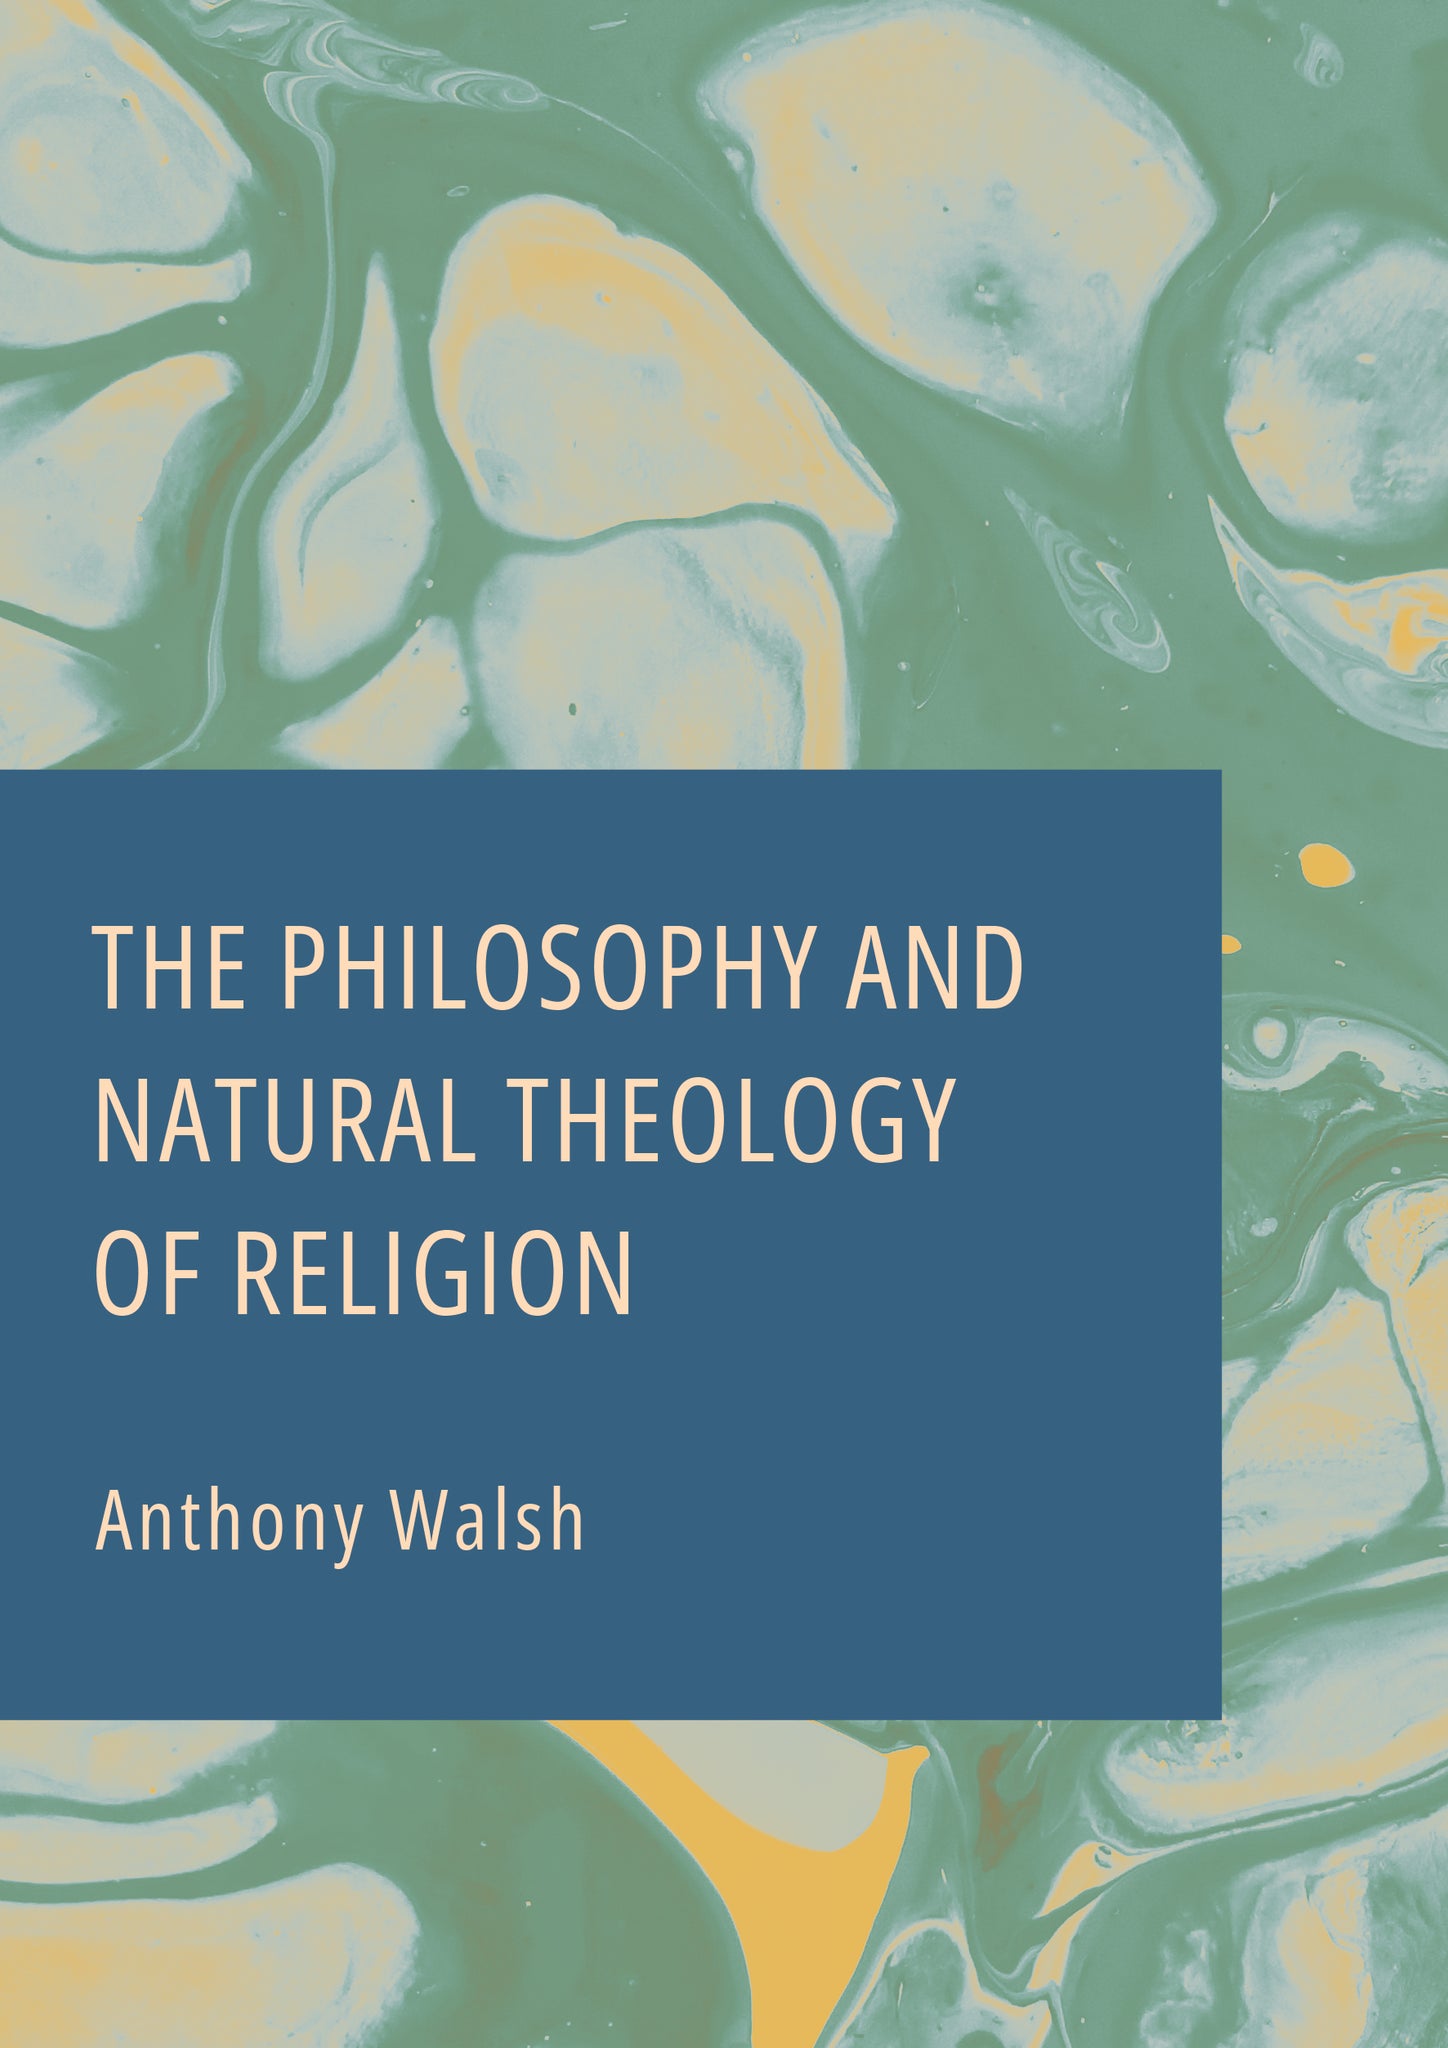 The Philosophy and Natural Theology of Religion